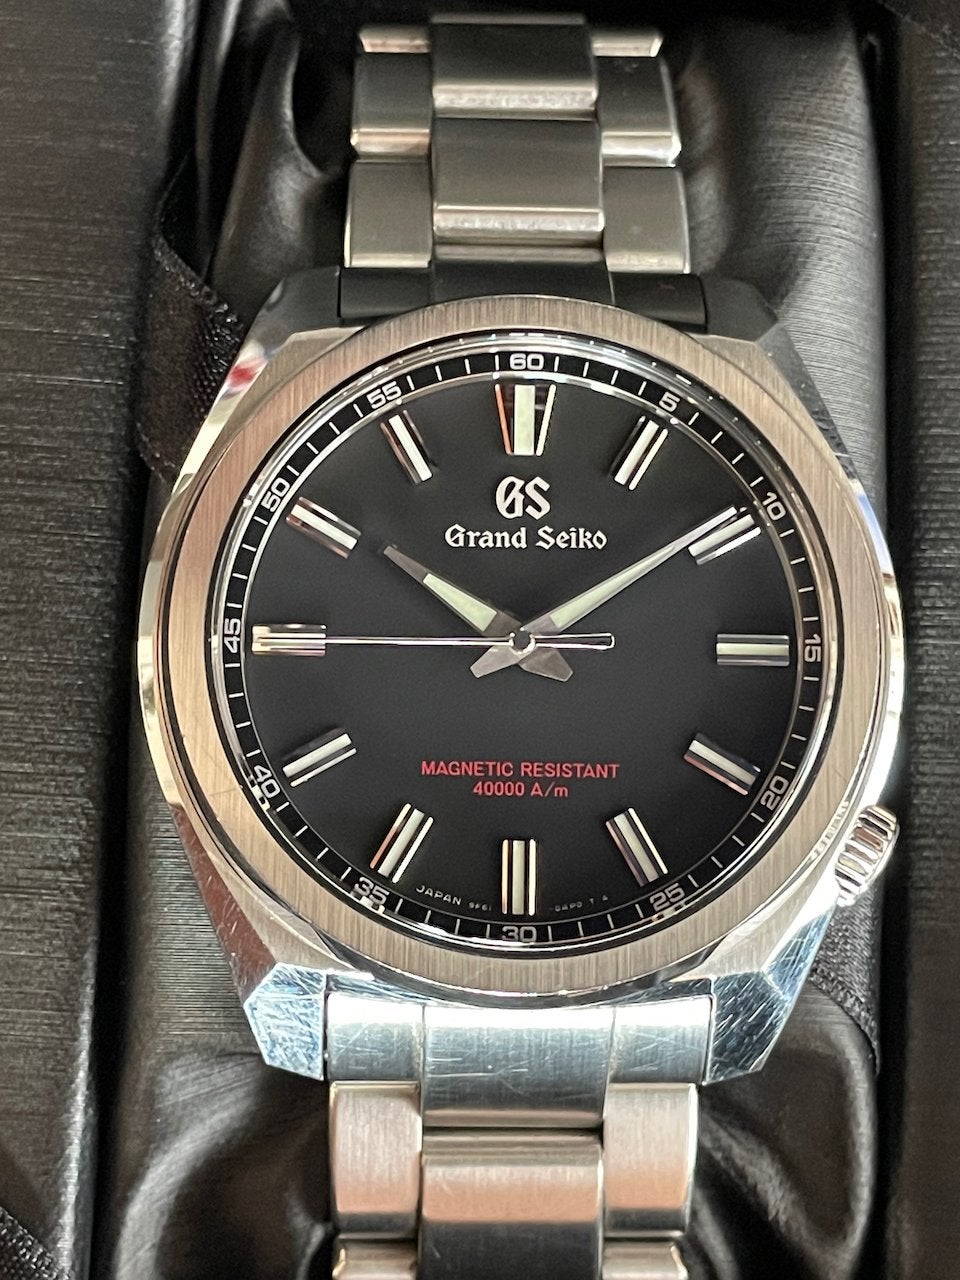 Grand Seiko SBGX343 9F61 40mm 200M 40,000 A/m Magnetic Resistance 2021 |  WatchUSeek Watch Forums